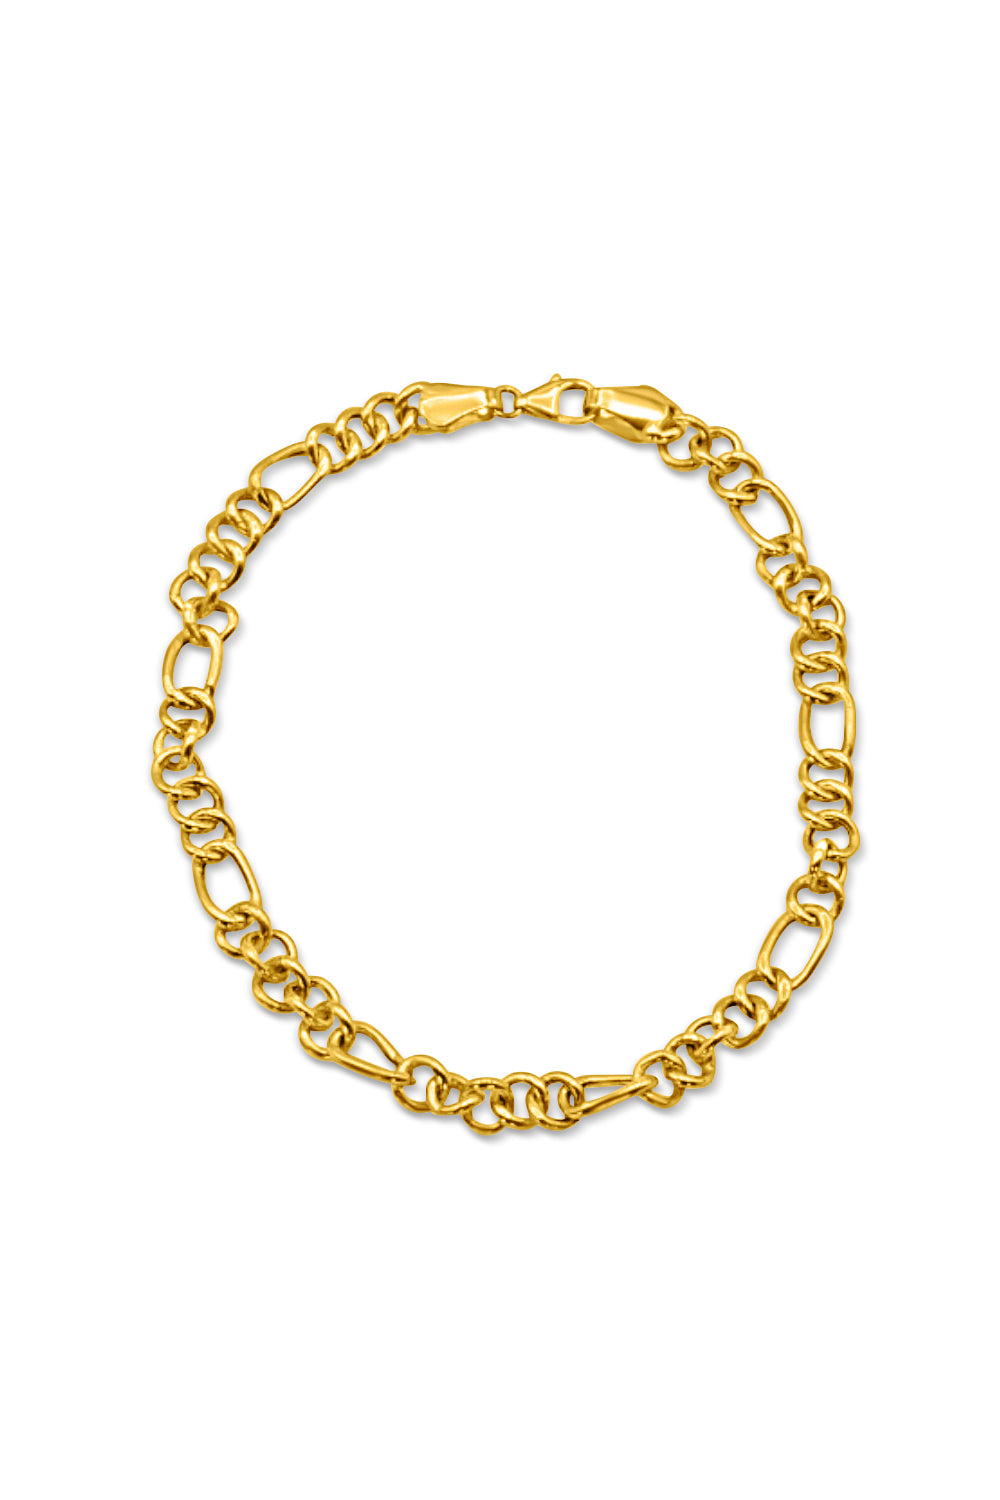 14k Gold Plated Cuban Link Chain Bracelet | Gold Chain Bracelet | Cuban Chain  Bracelet For Women – Halo Jewelry